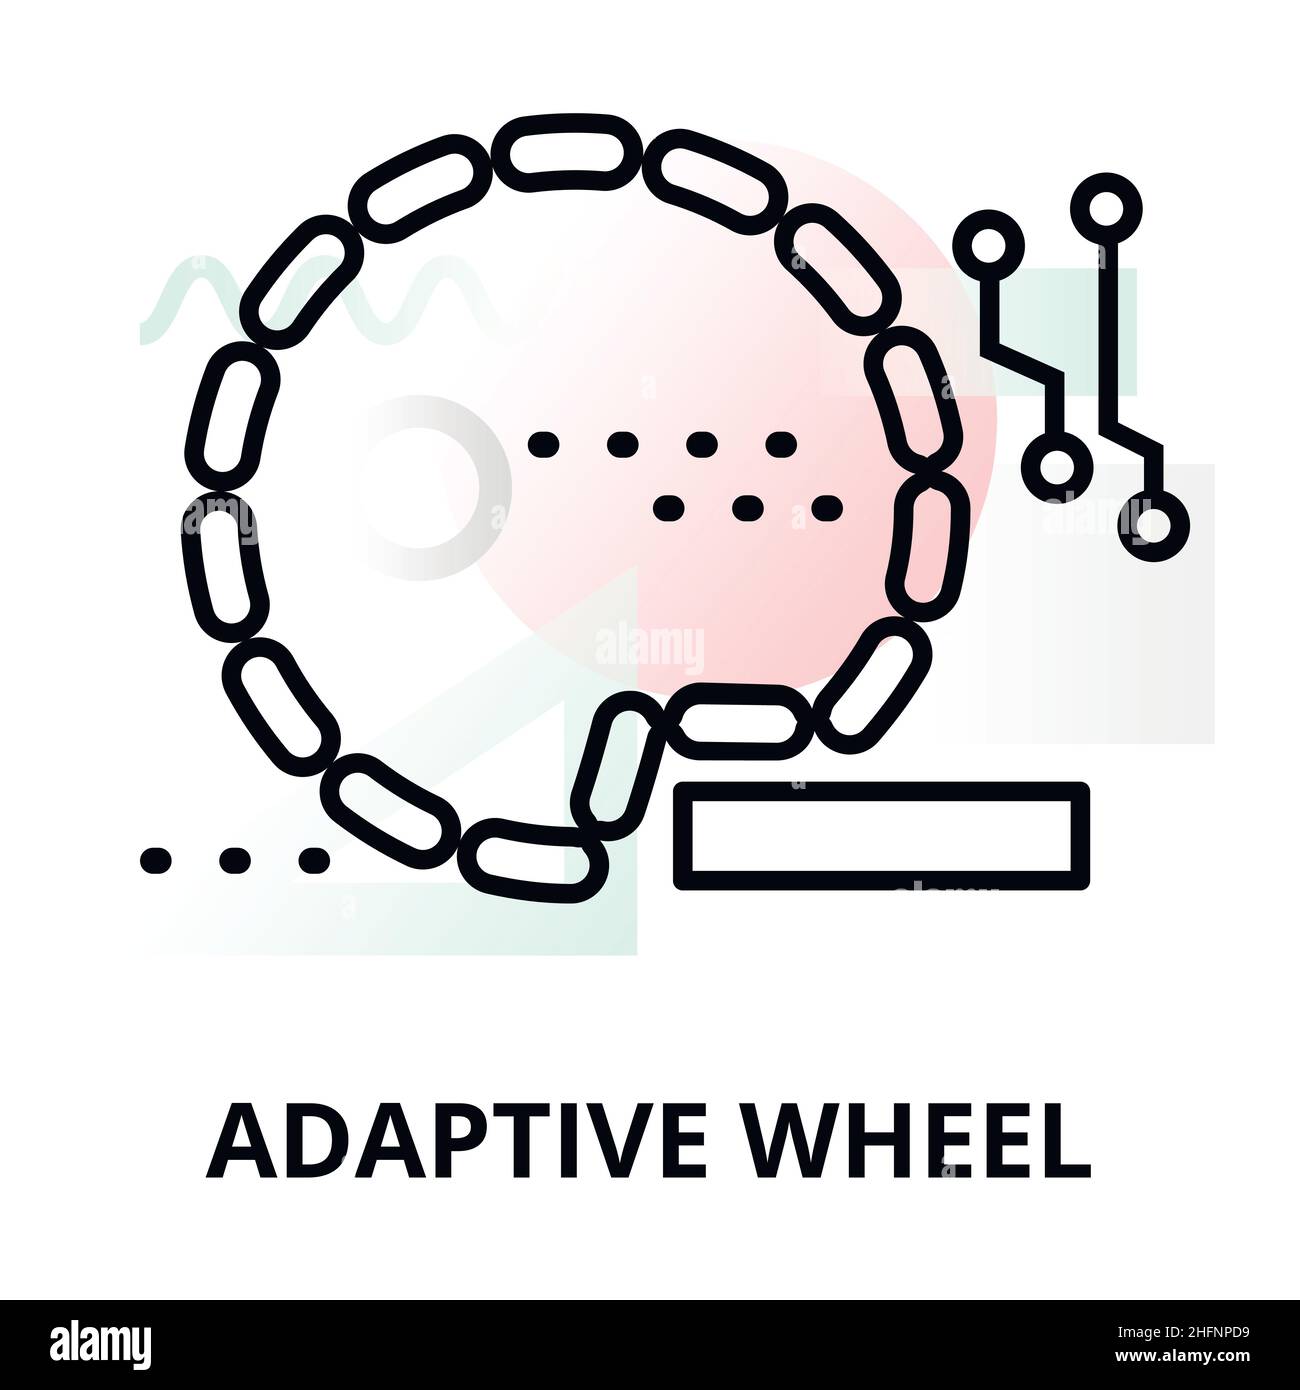 Abstract icon of future technology - adaptive wheel on color geometric shapes background, for graphic and web design Stock Vector